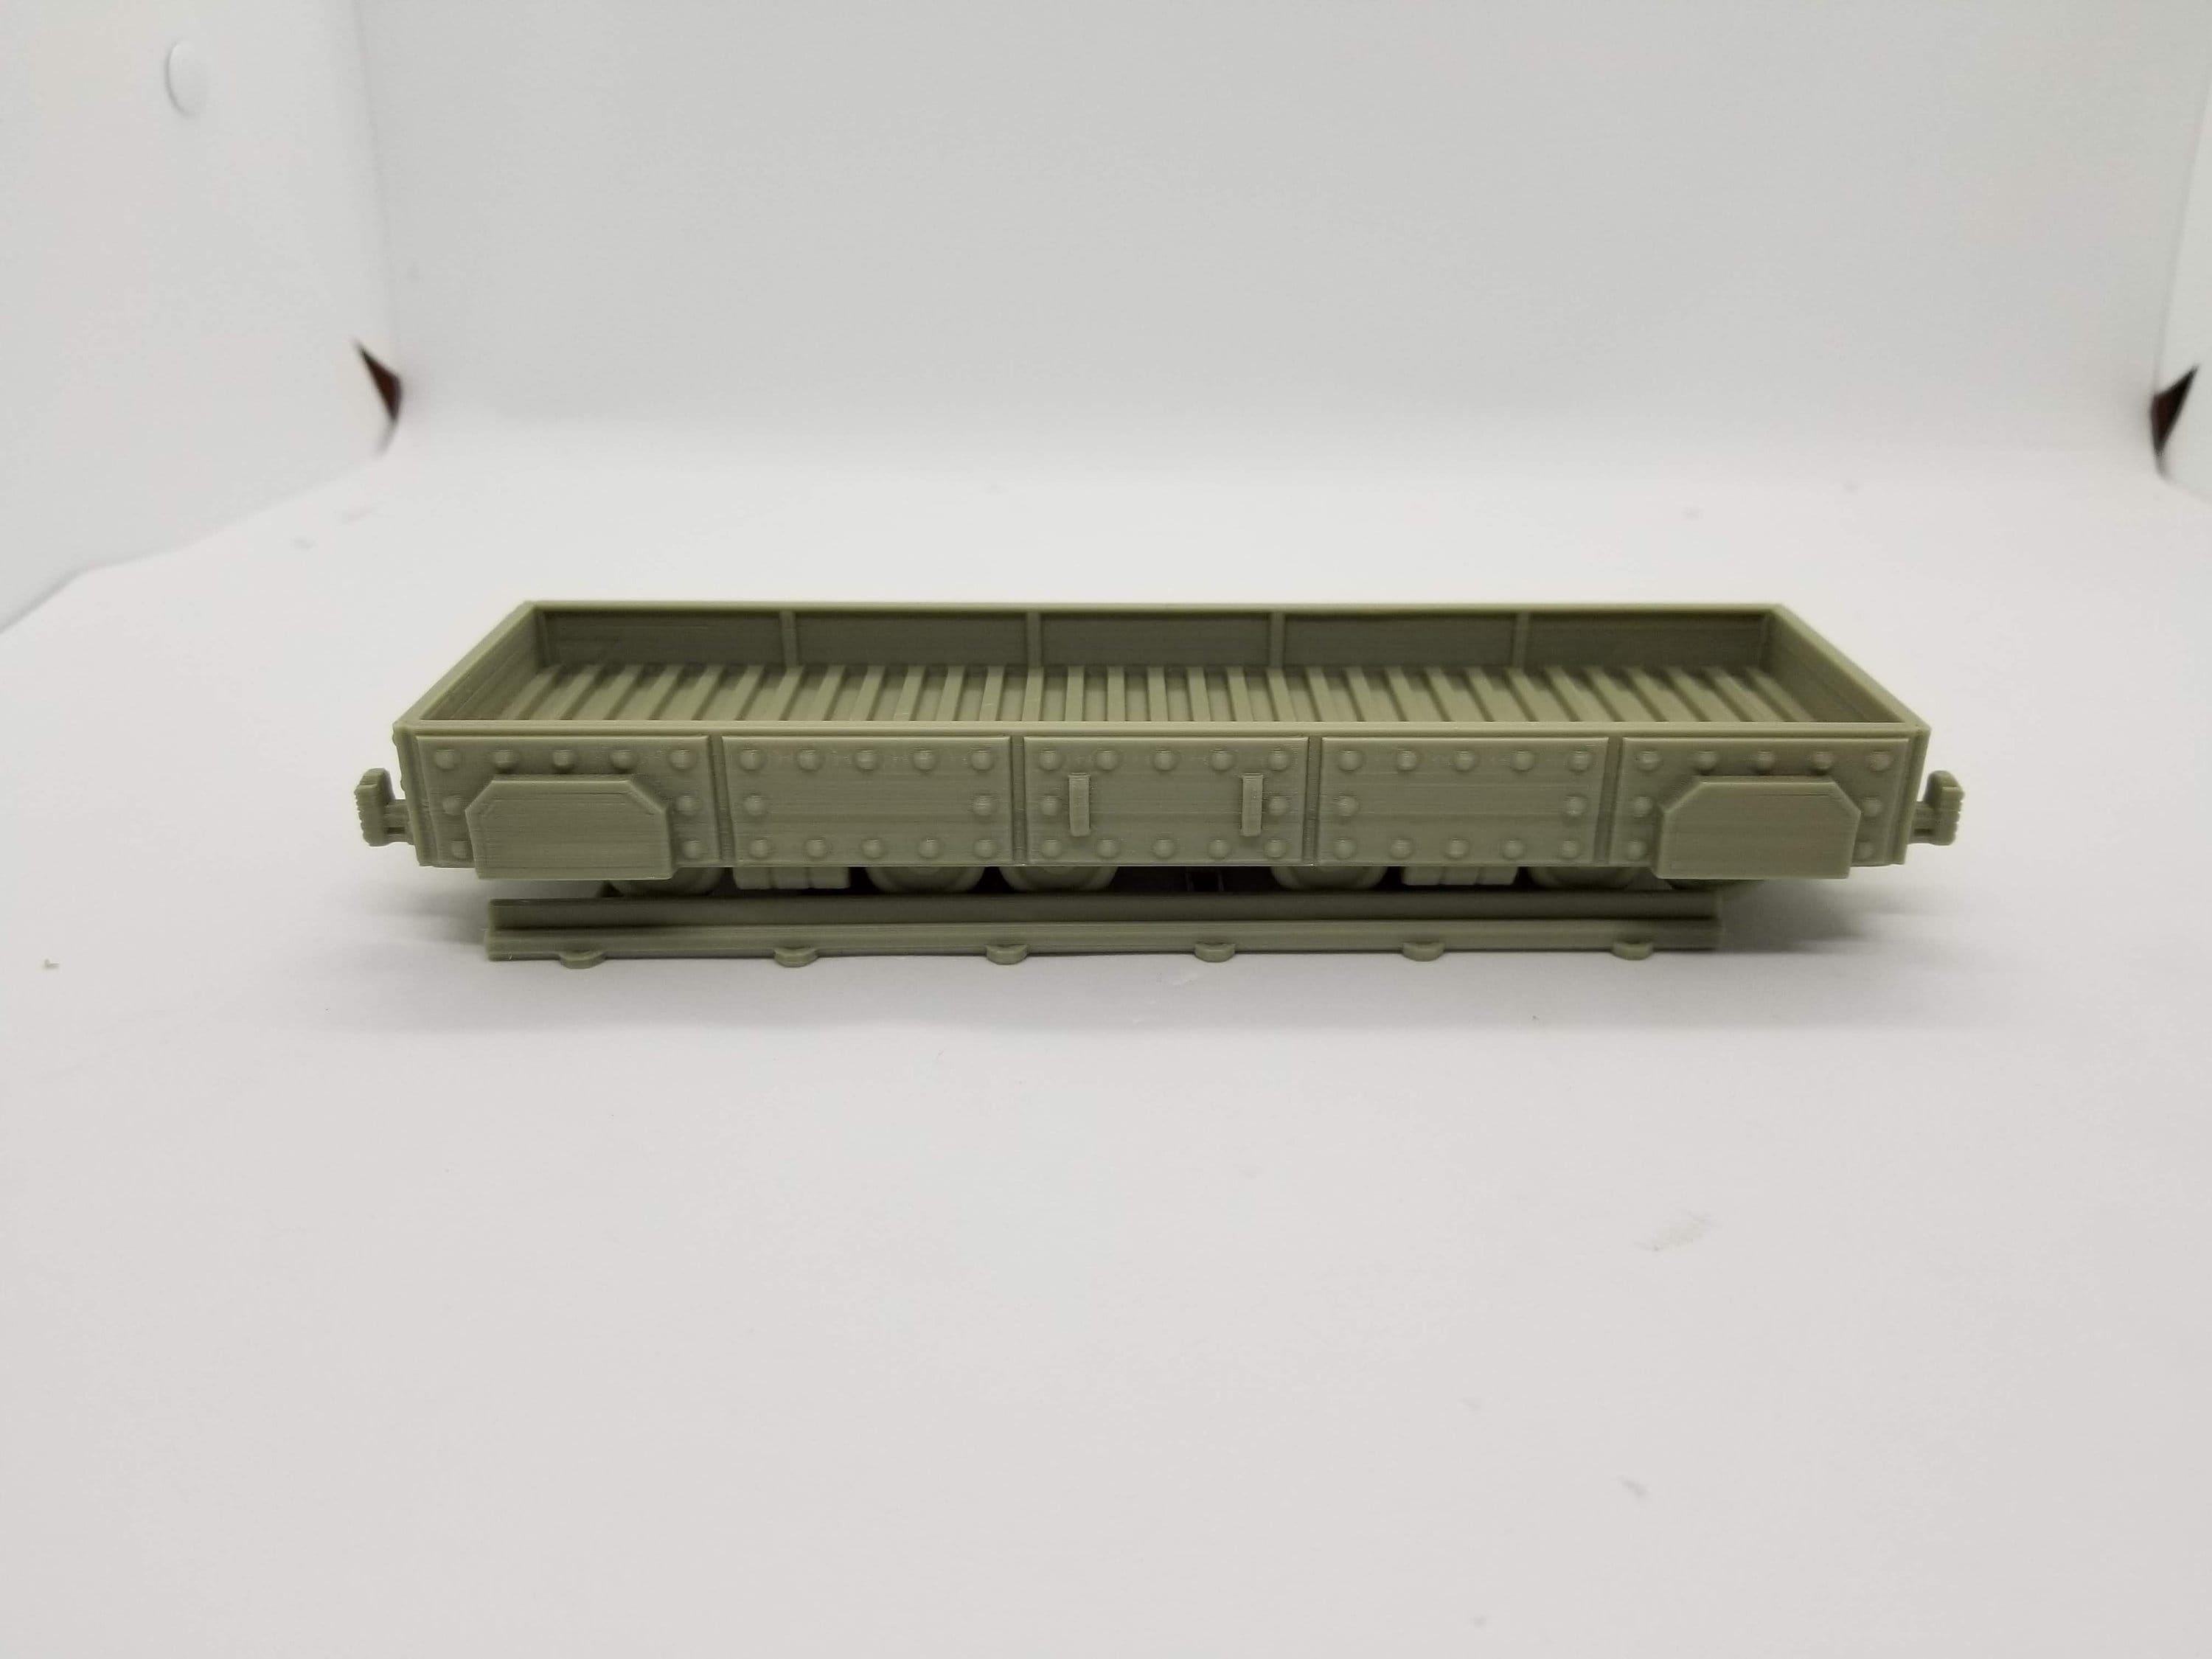 Sci-Fi Train Empty Bed Car Add-On/ 28mm Wargaming Terrain / Warlayer /Print to Order / 3d Printed/Licensed Printer